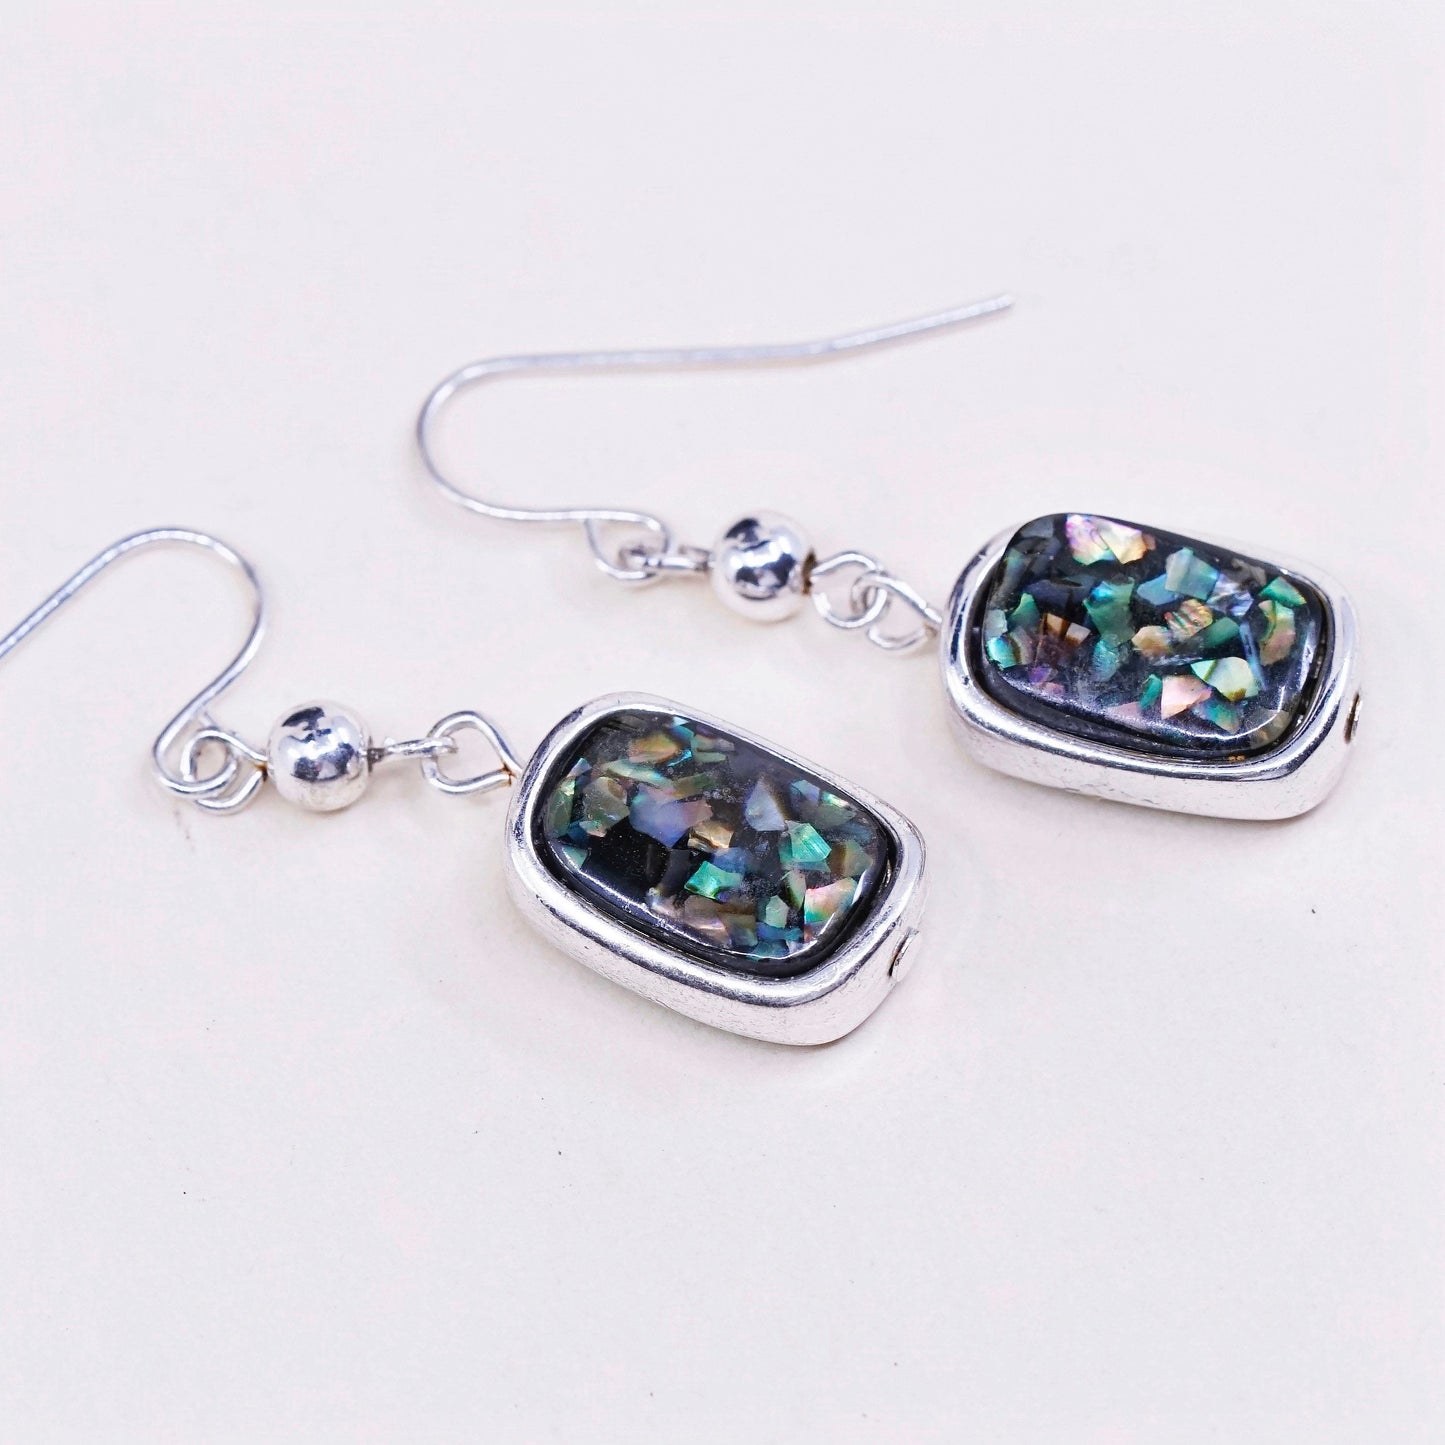 Vintage sterling silver handmade oval earrings, Mexico 925 with abalone